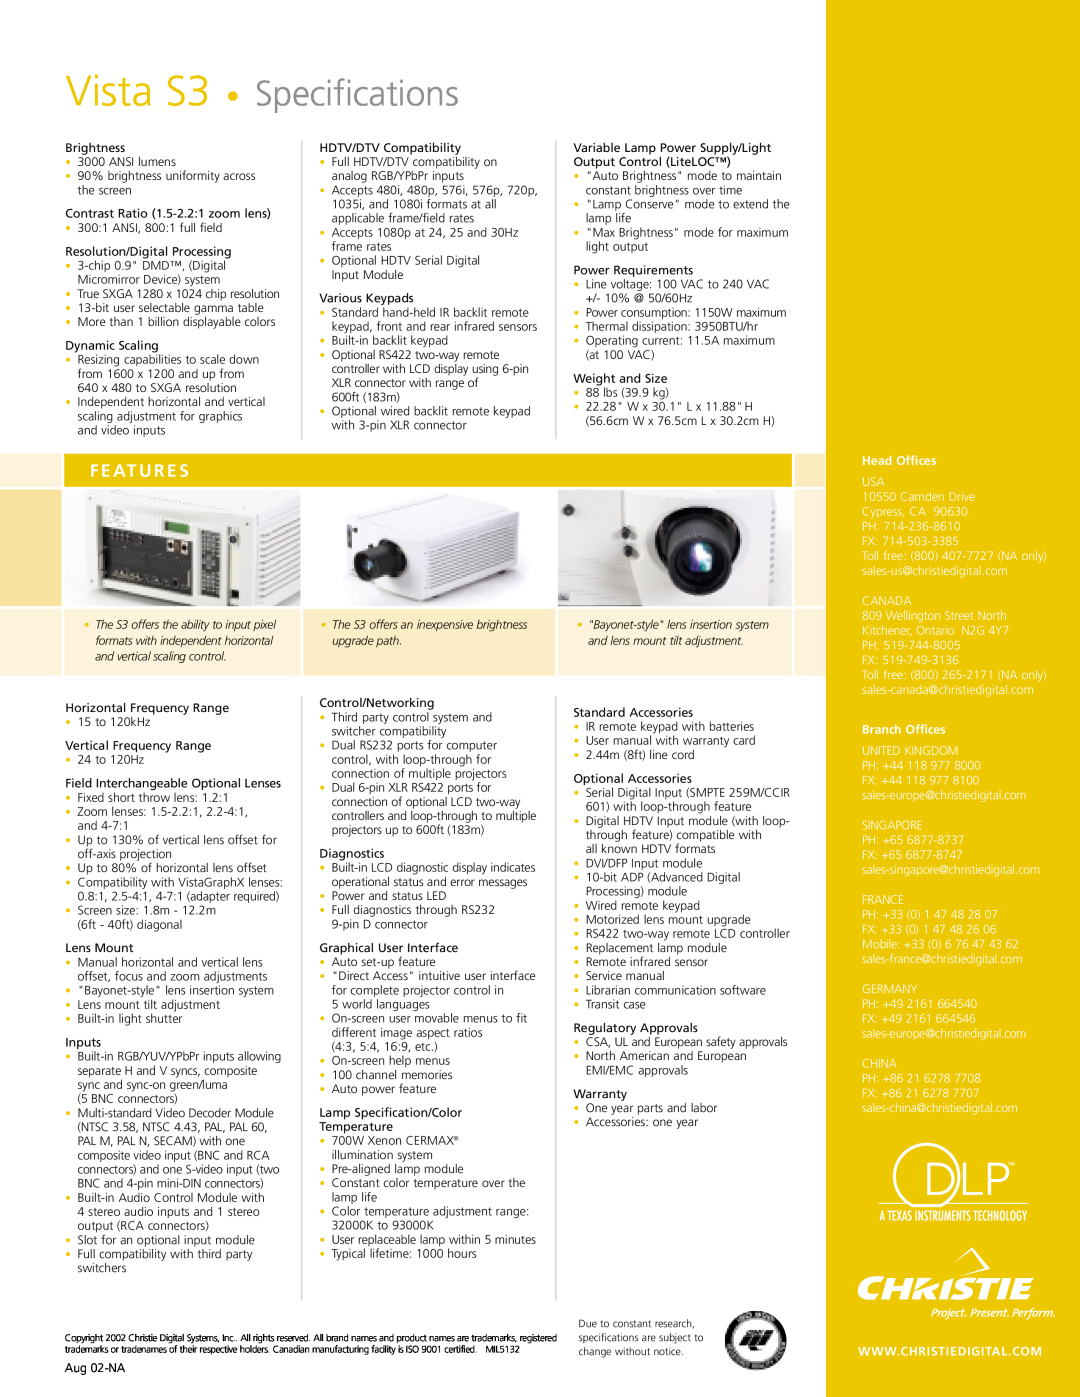 Christie Digital Systems F E At U R E S, Vista S3 Specifications, Head Offices, Branch Offices, GERMANY PH +49 2161 